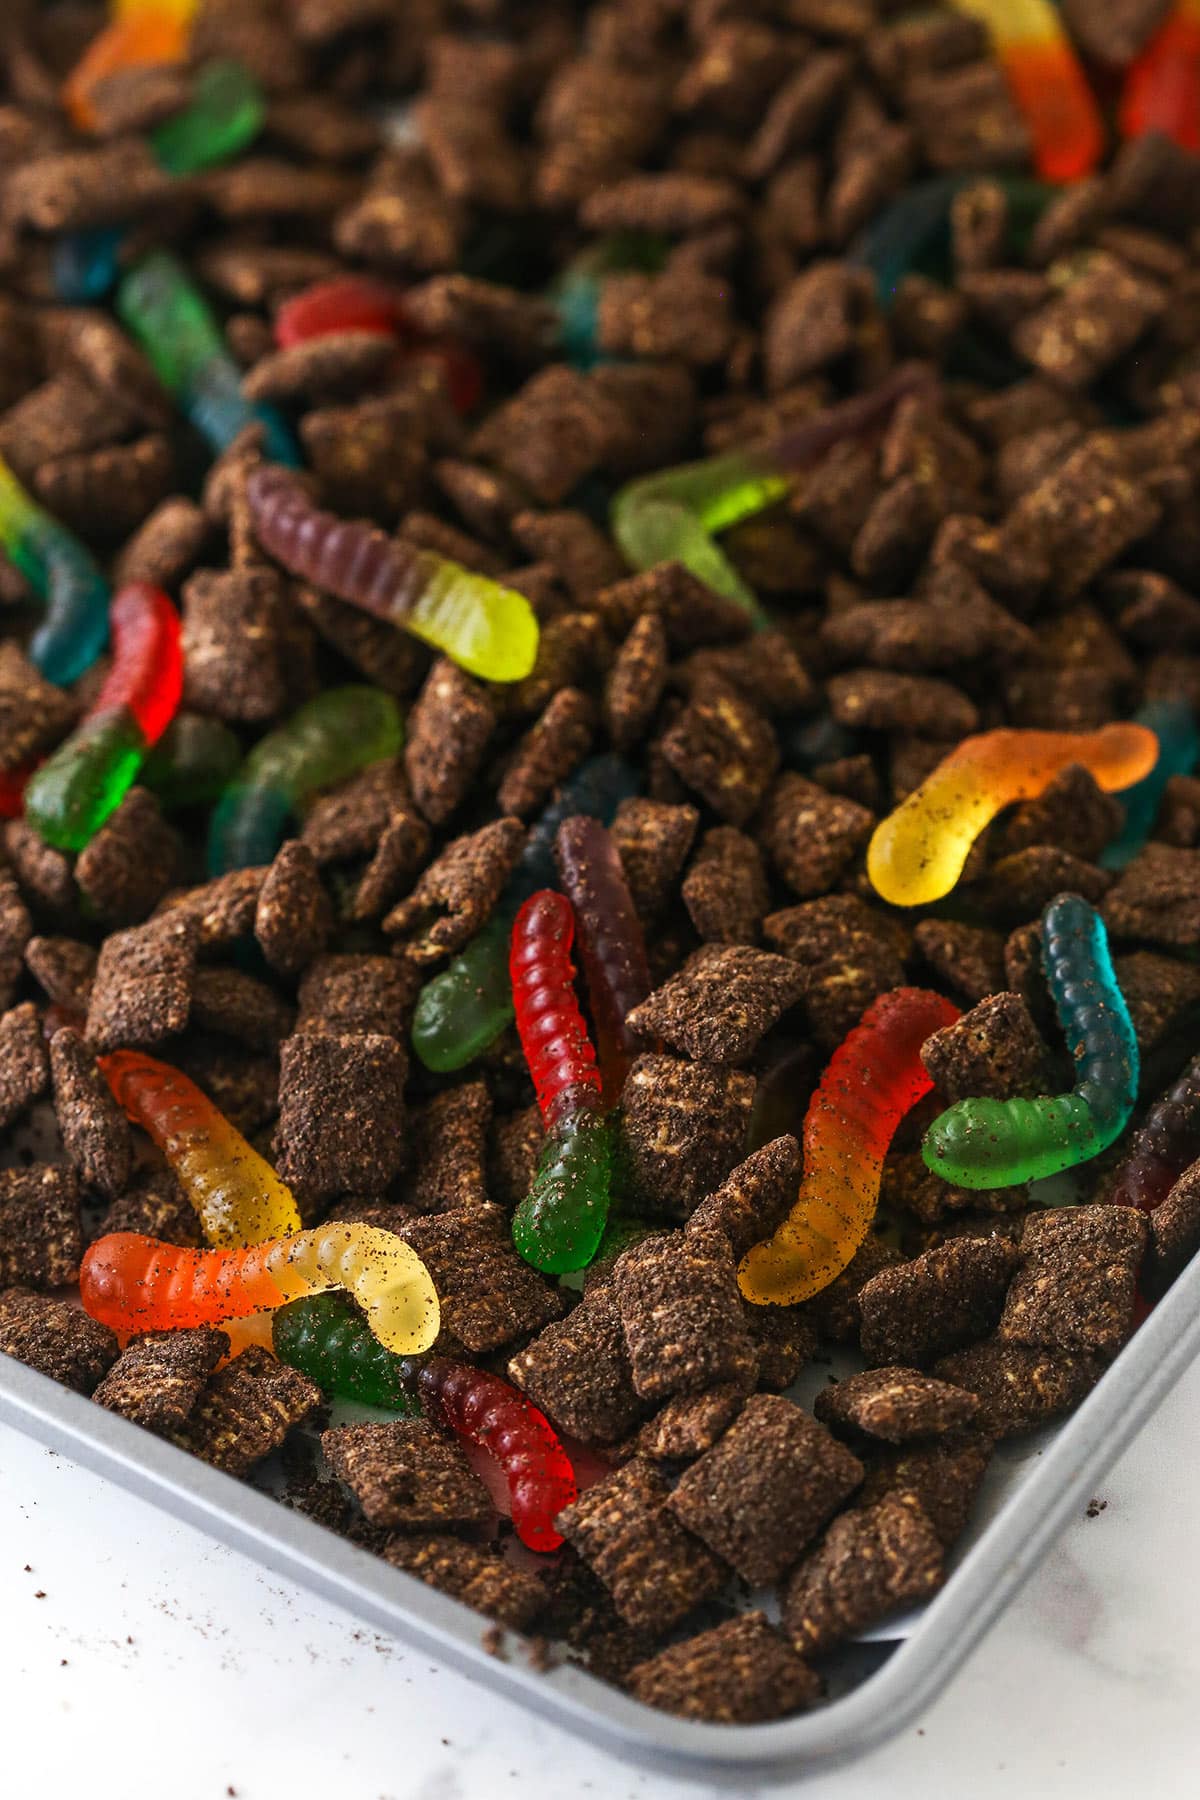 Chocolate covered Chex cereal and gummy worms laid out on a parchment paper-lined baking sheet for Dirt and Worms Puppy Chow.